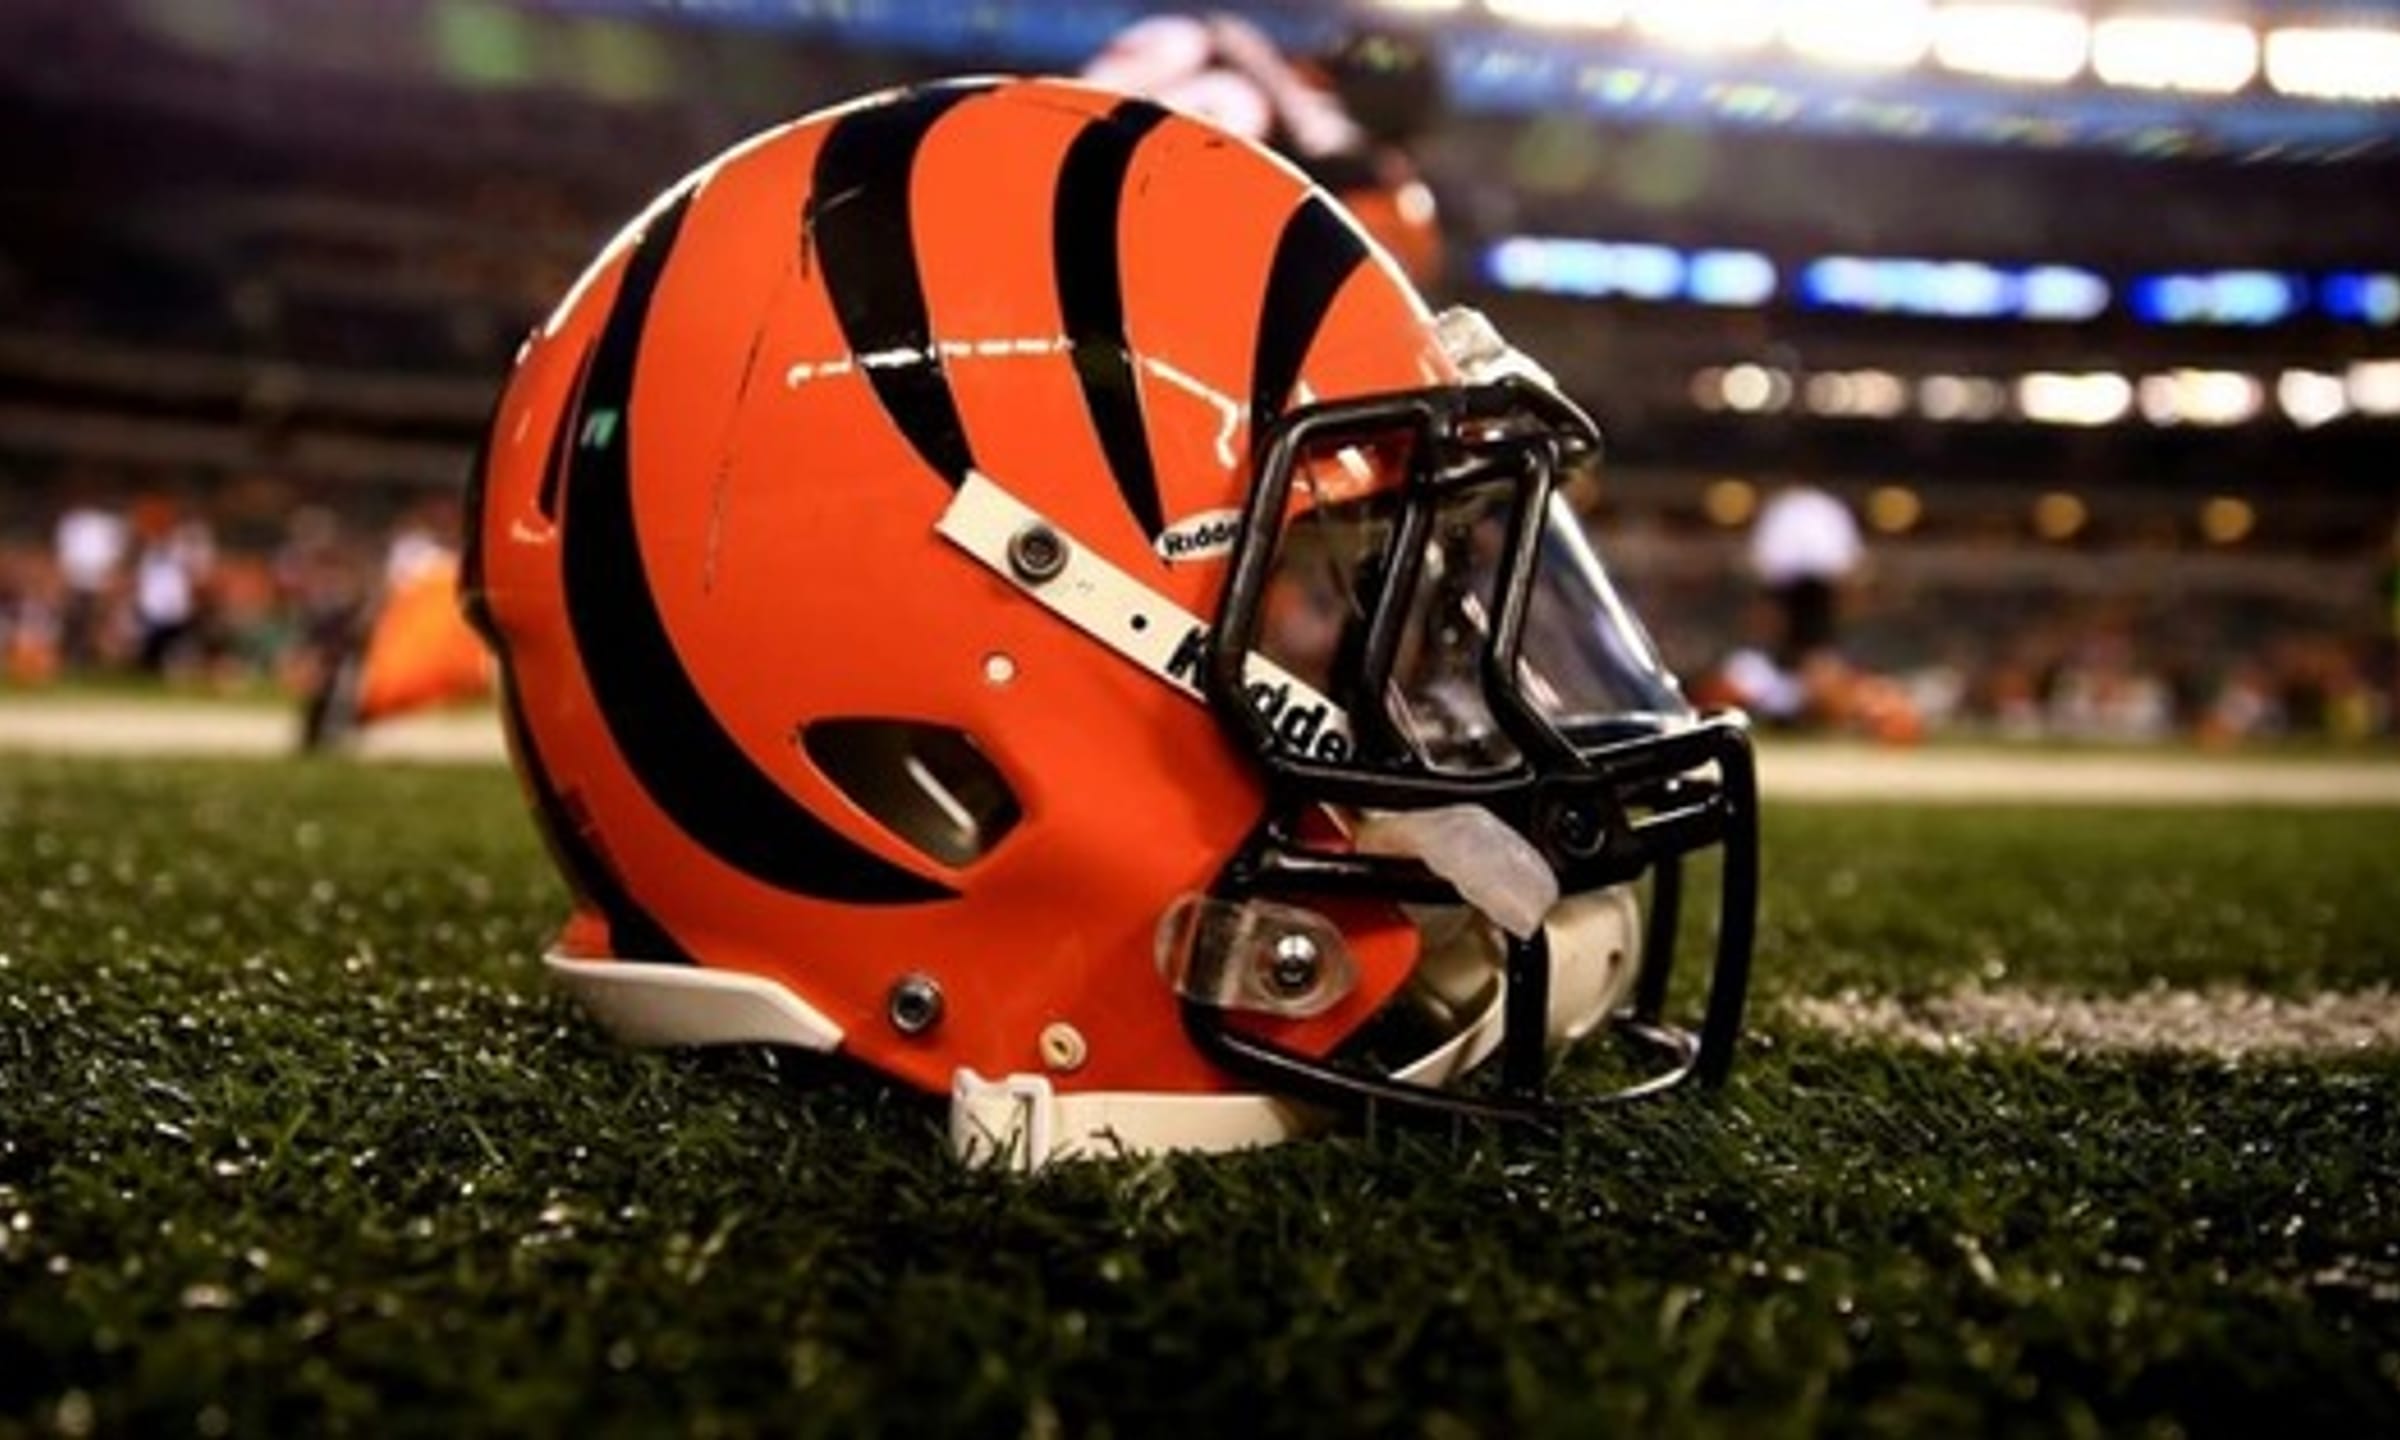 NEWS REPORT: SO Sad For Cincinnati Bengals As They Face Another QB Issue This Week…